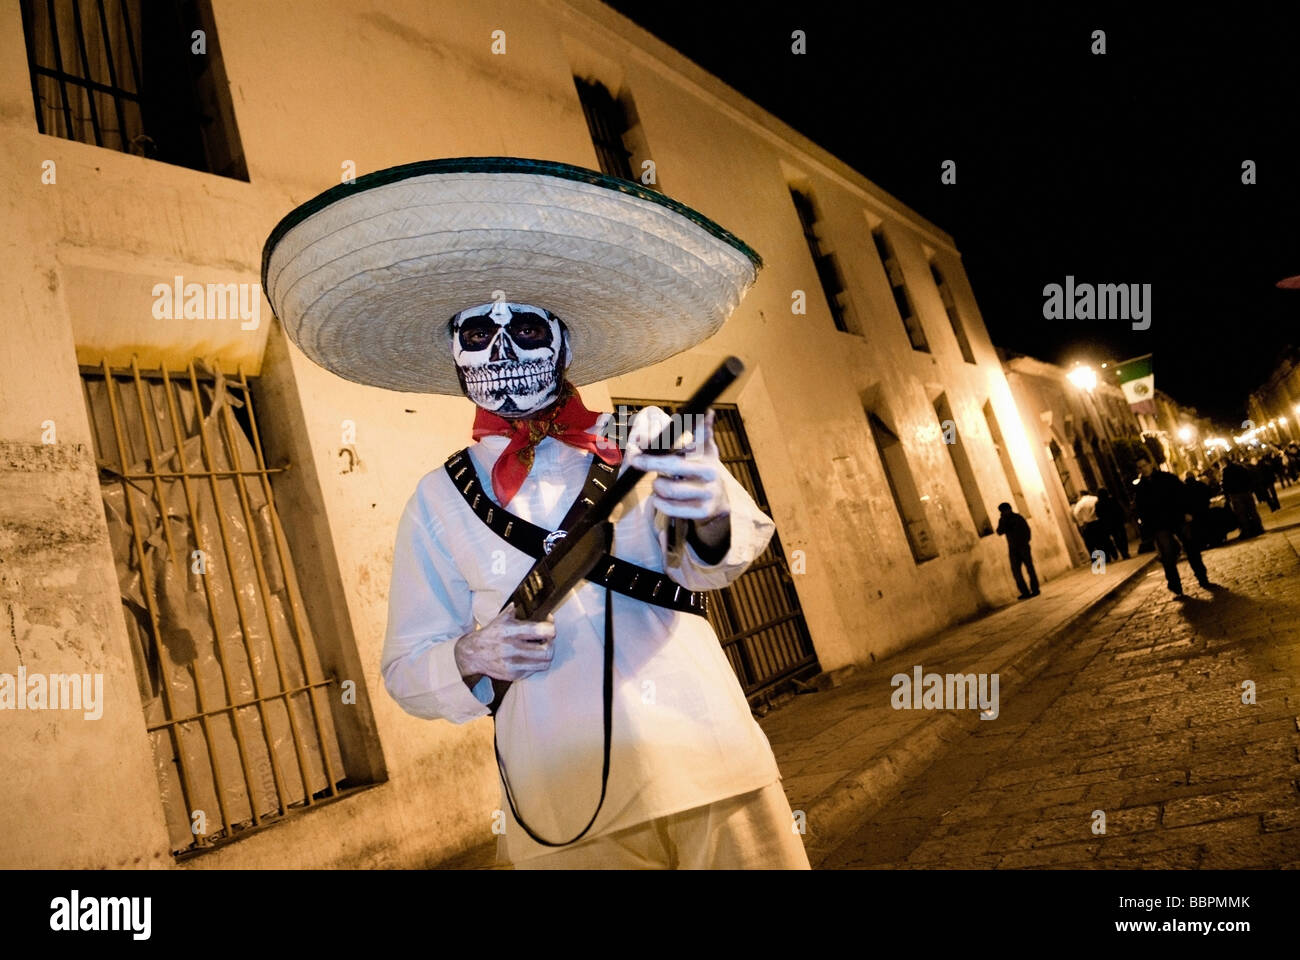 Mexico;Boy dressed as a bandit for Mexican Day Of The Dead celebration Stock Photo